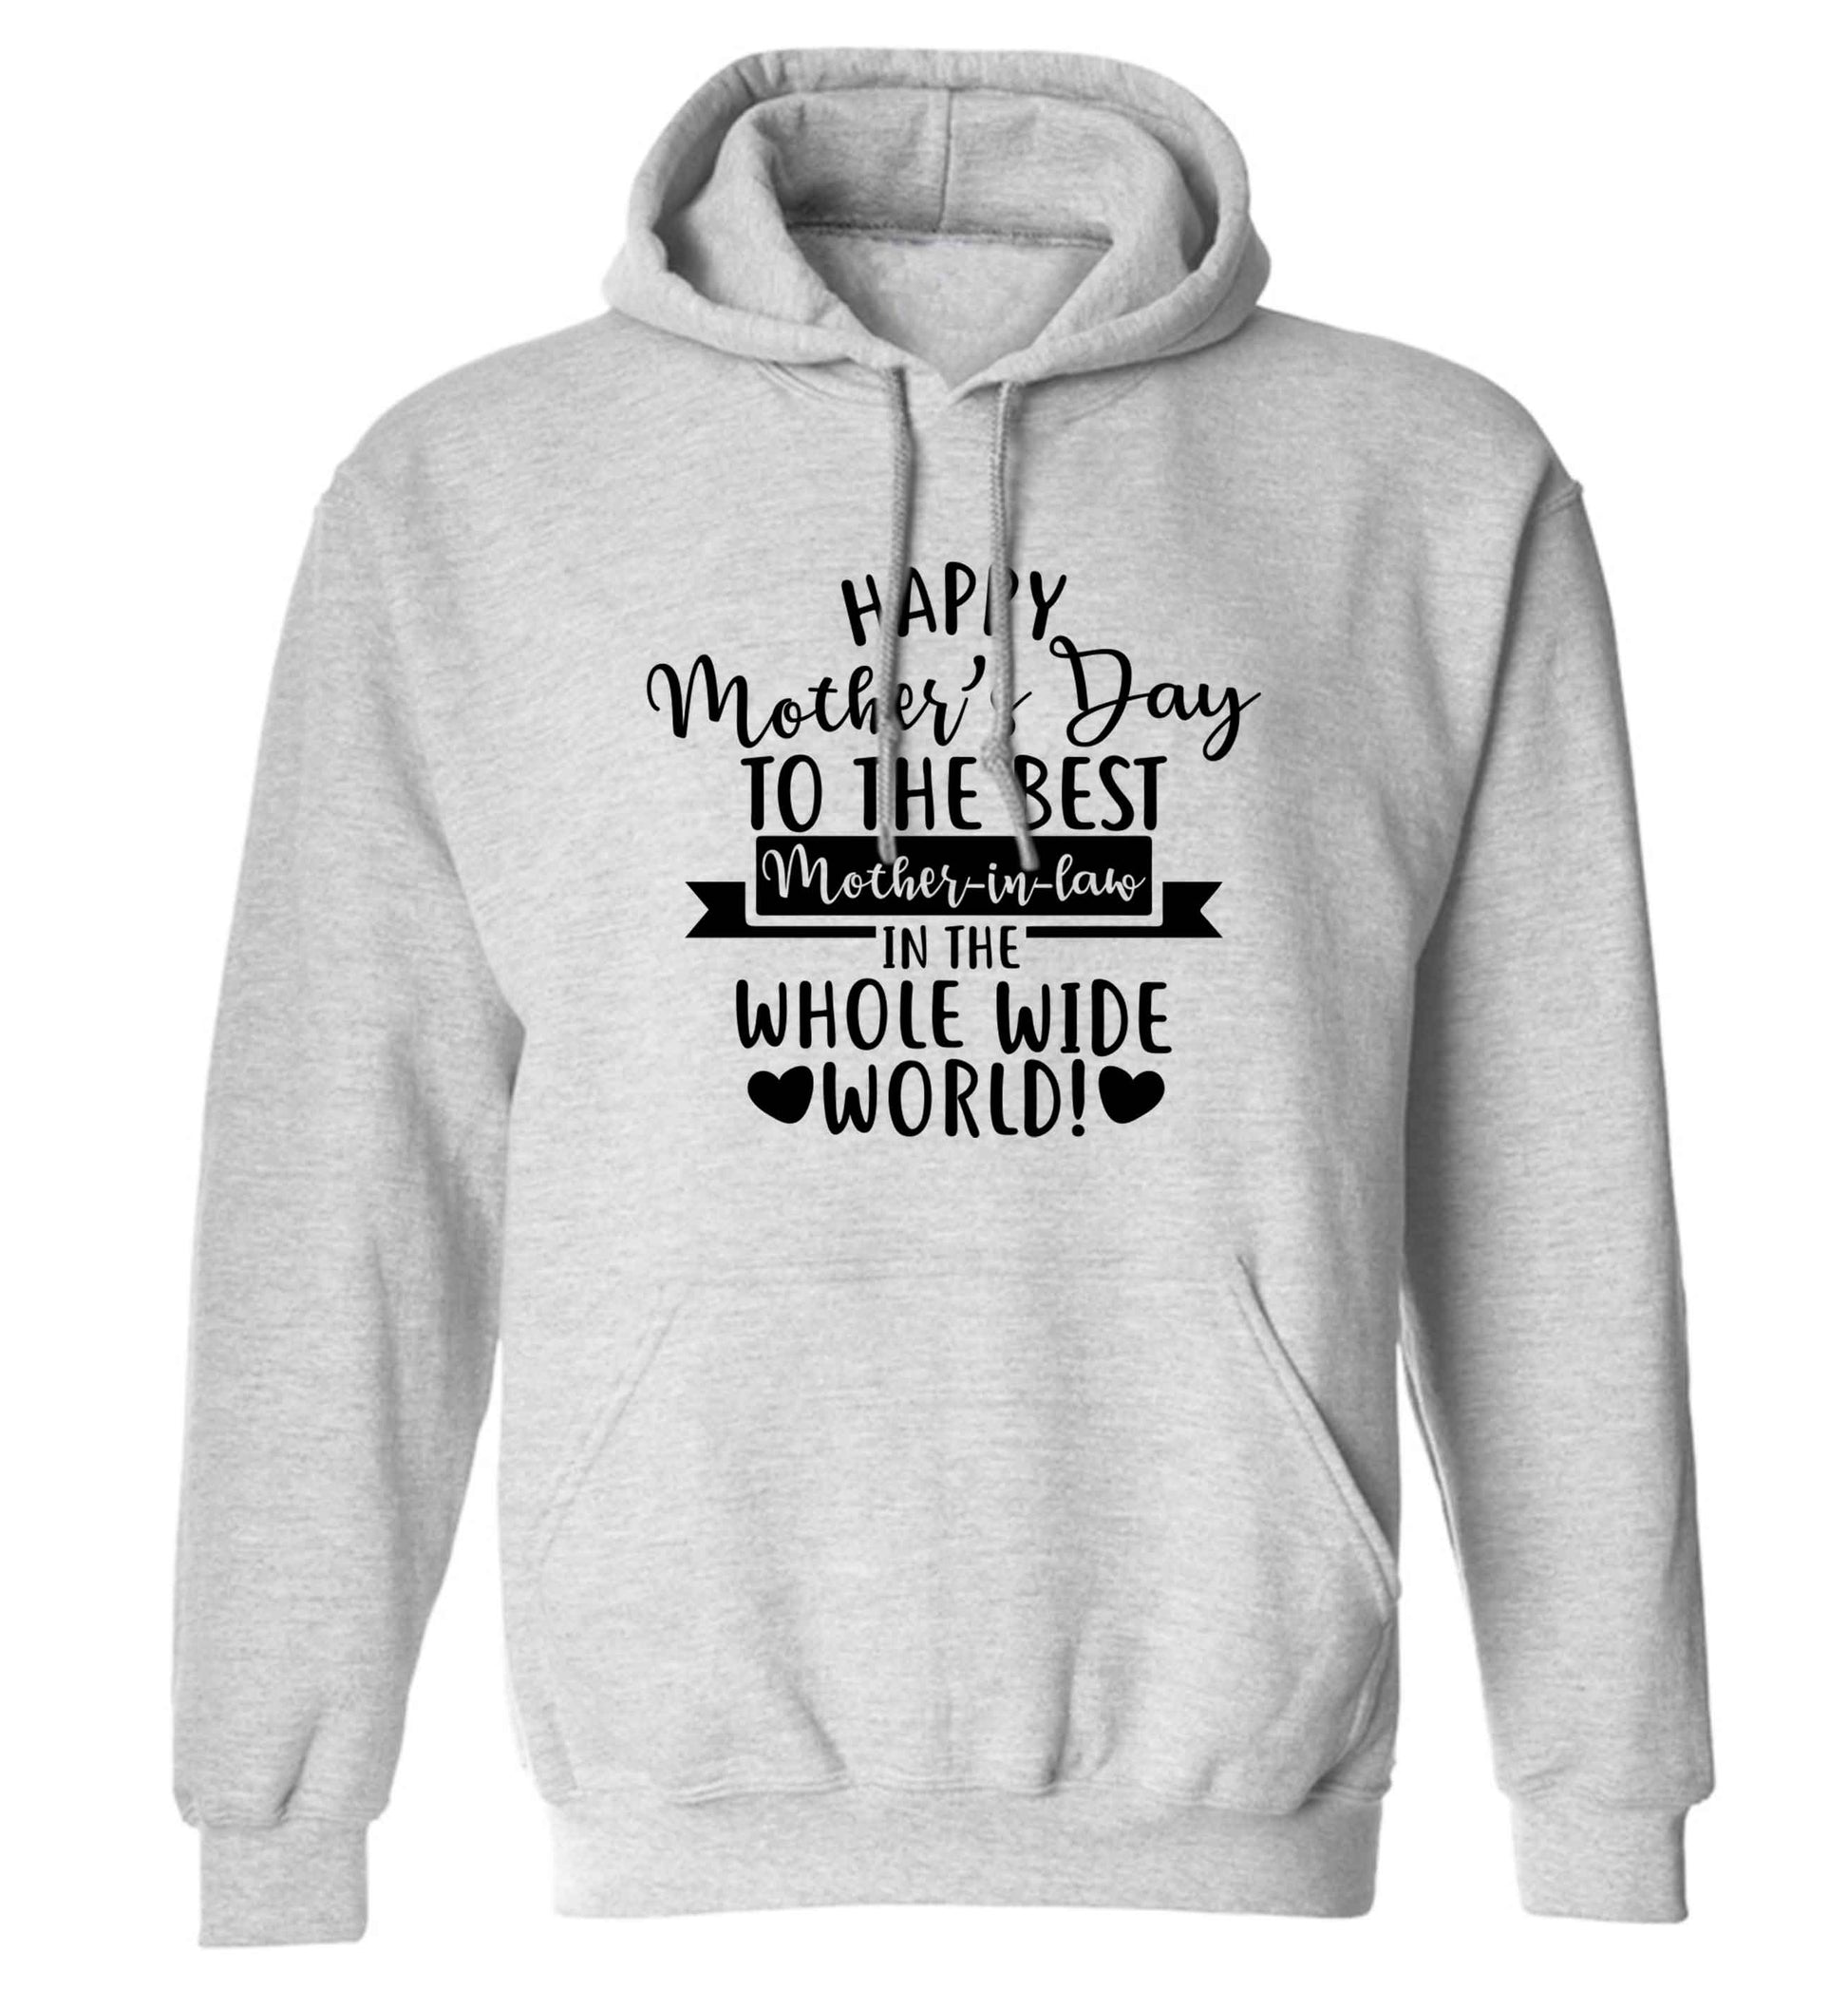 Happy mother's day to the best mother-in law in the world adults unisex grey hoodie 2XL